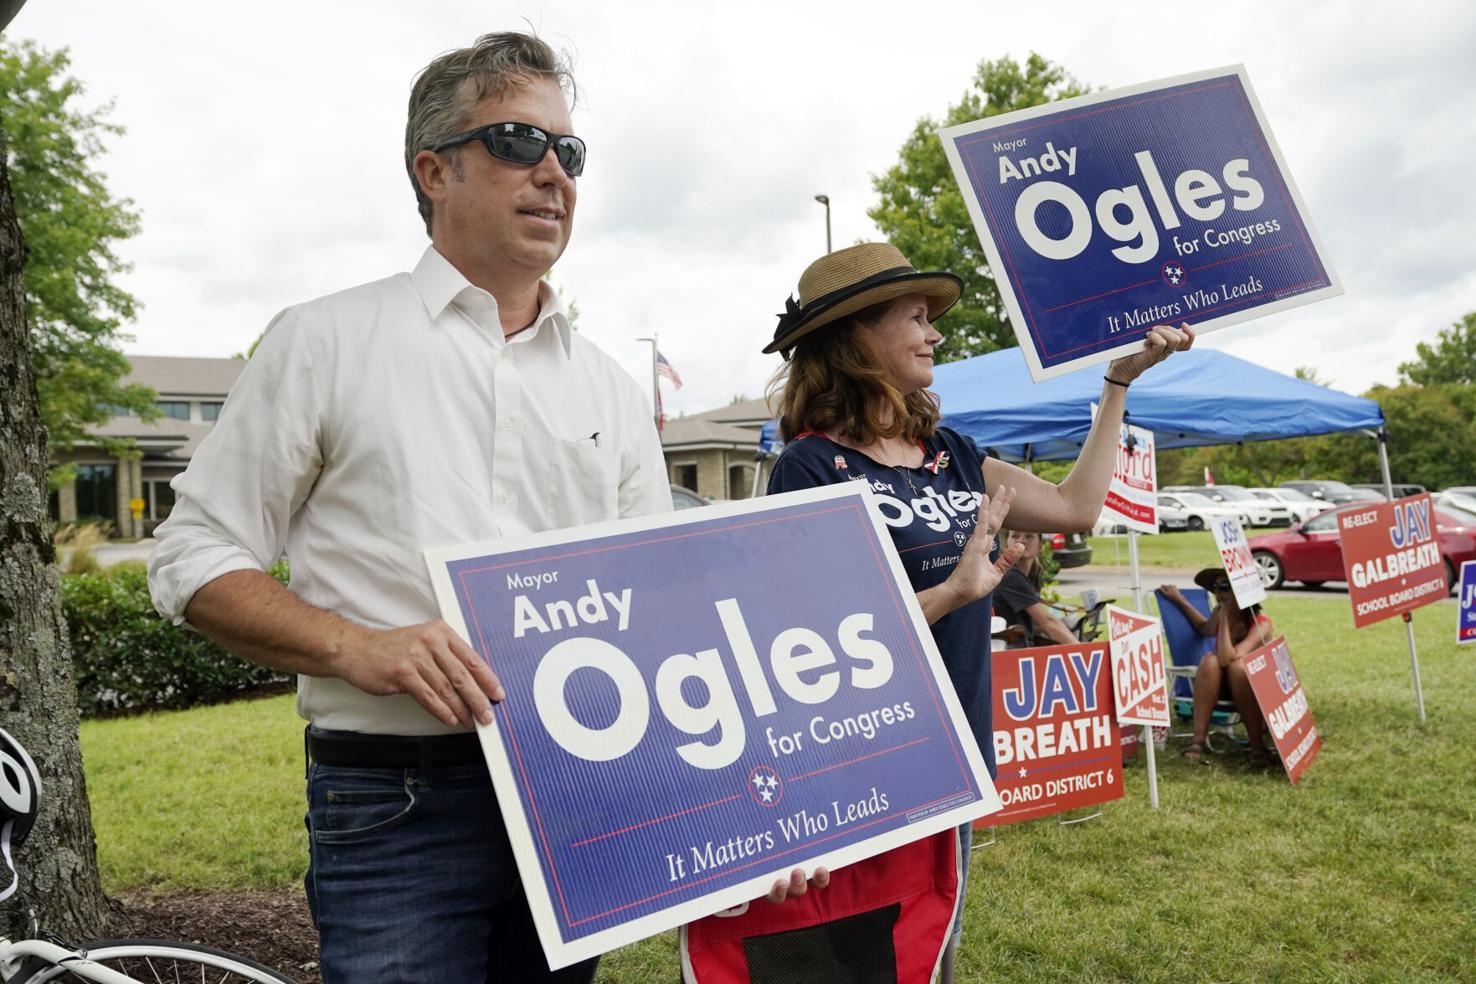 ogles-leads-hotly-contested-gop-race-in-tennessee-s-5th-congressional